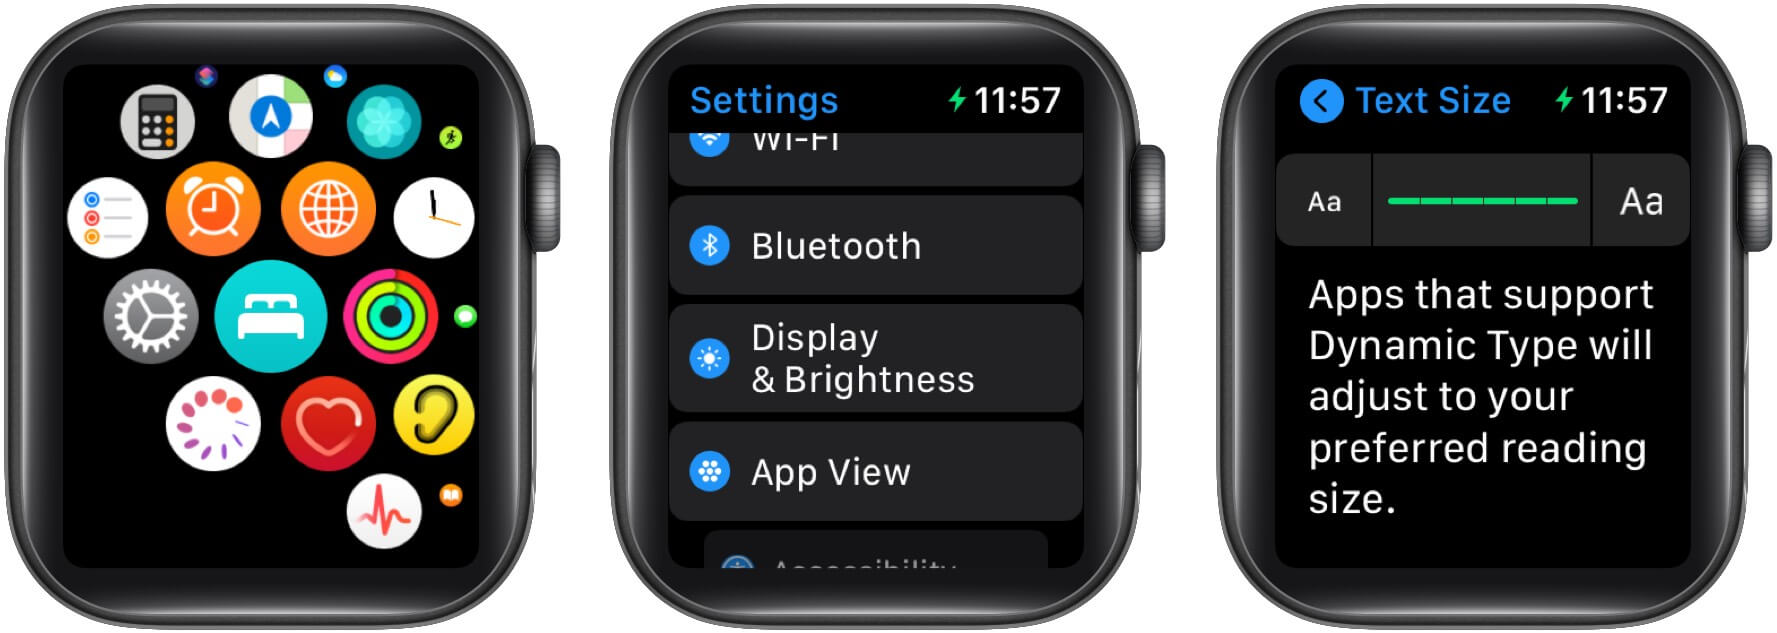 To increase text size using Apple Watch